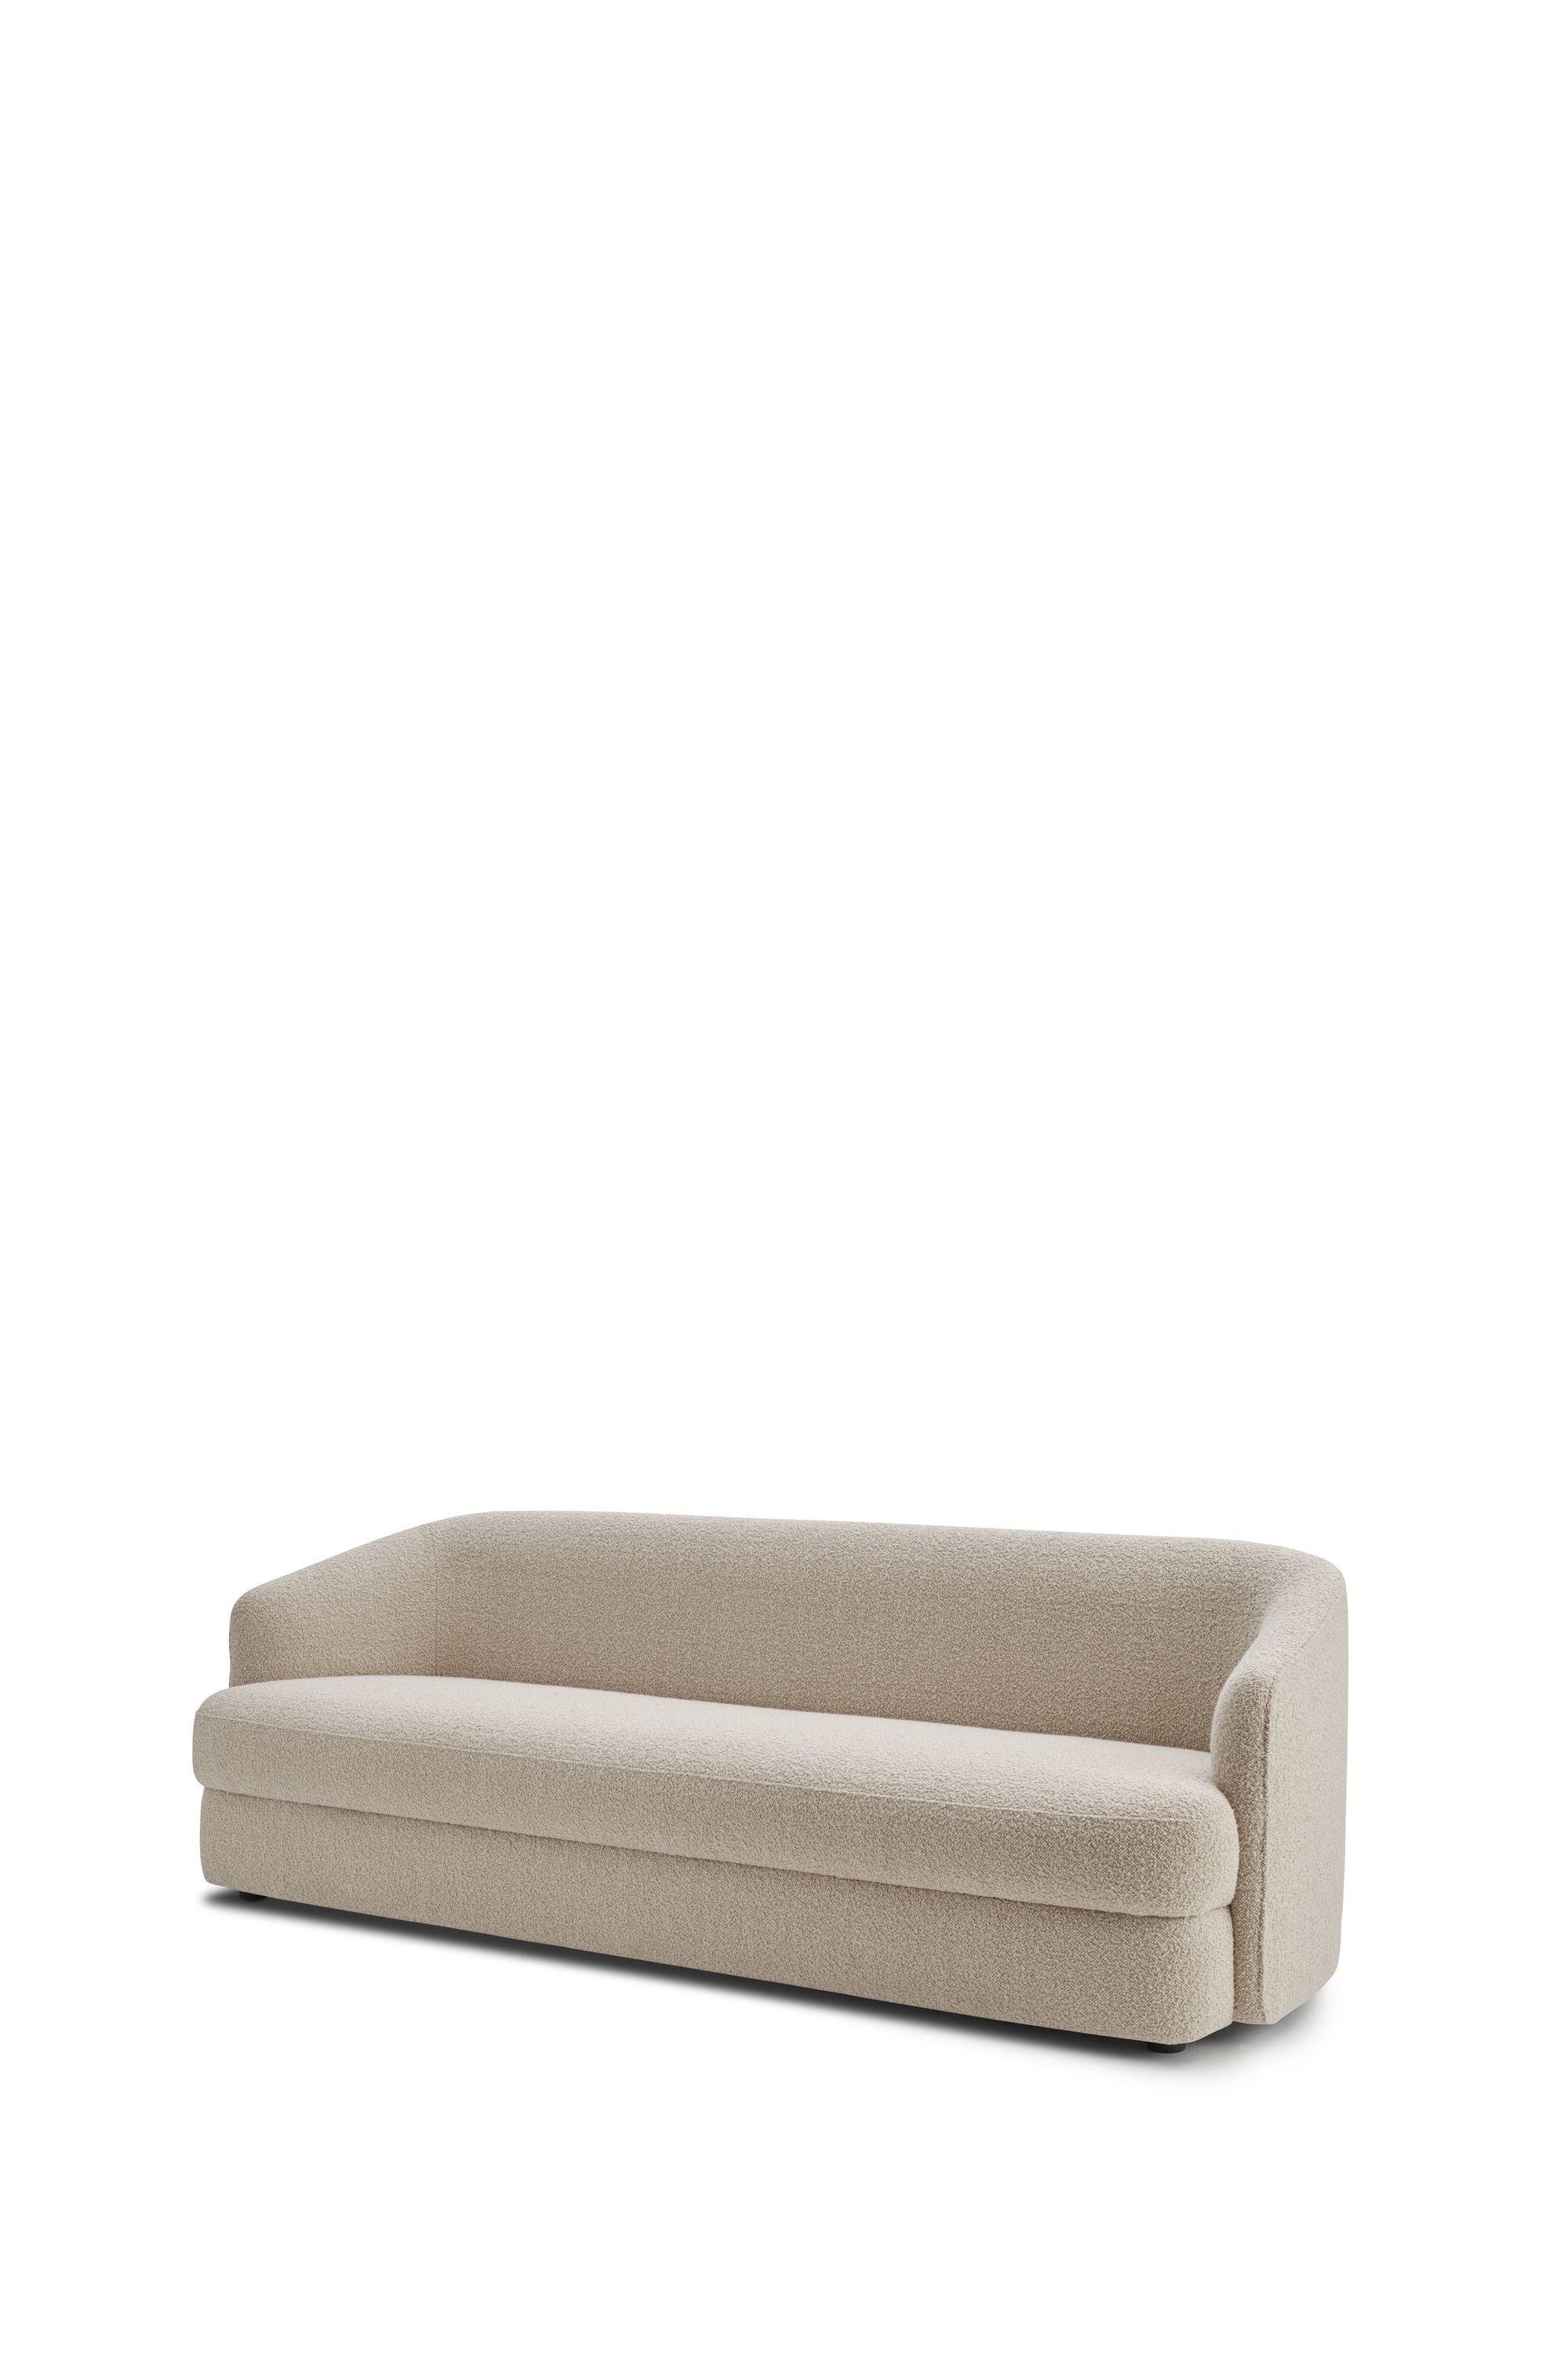 Nouvelles œuvres Sofa Covent 3 Seater, Duna 003